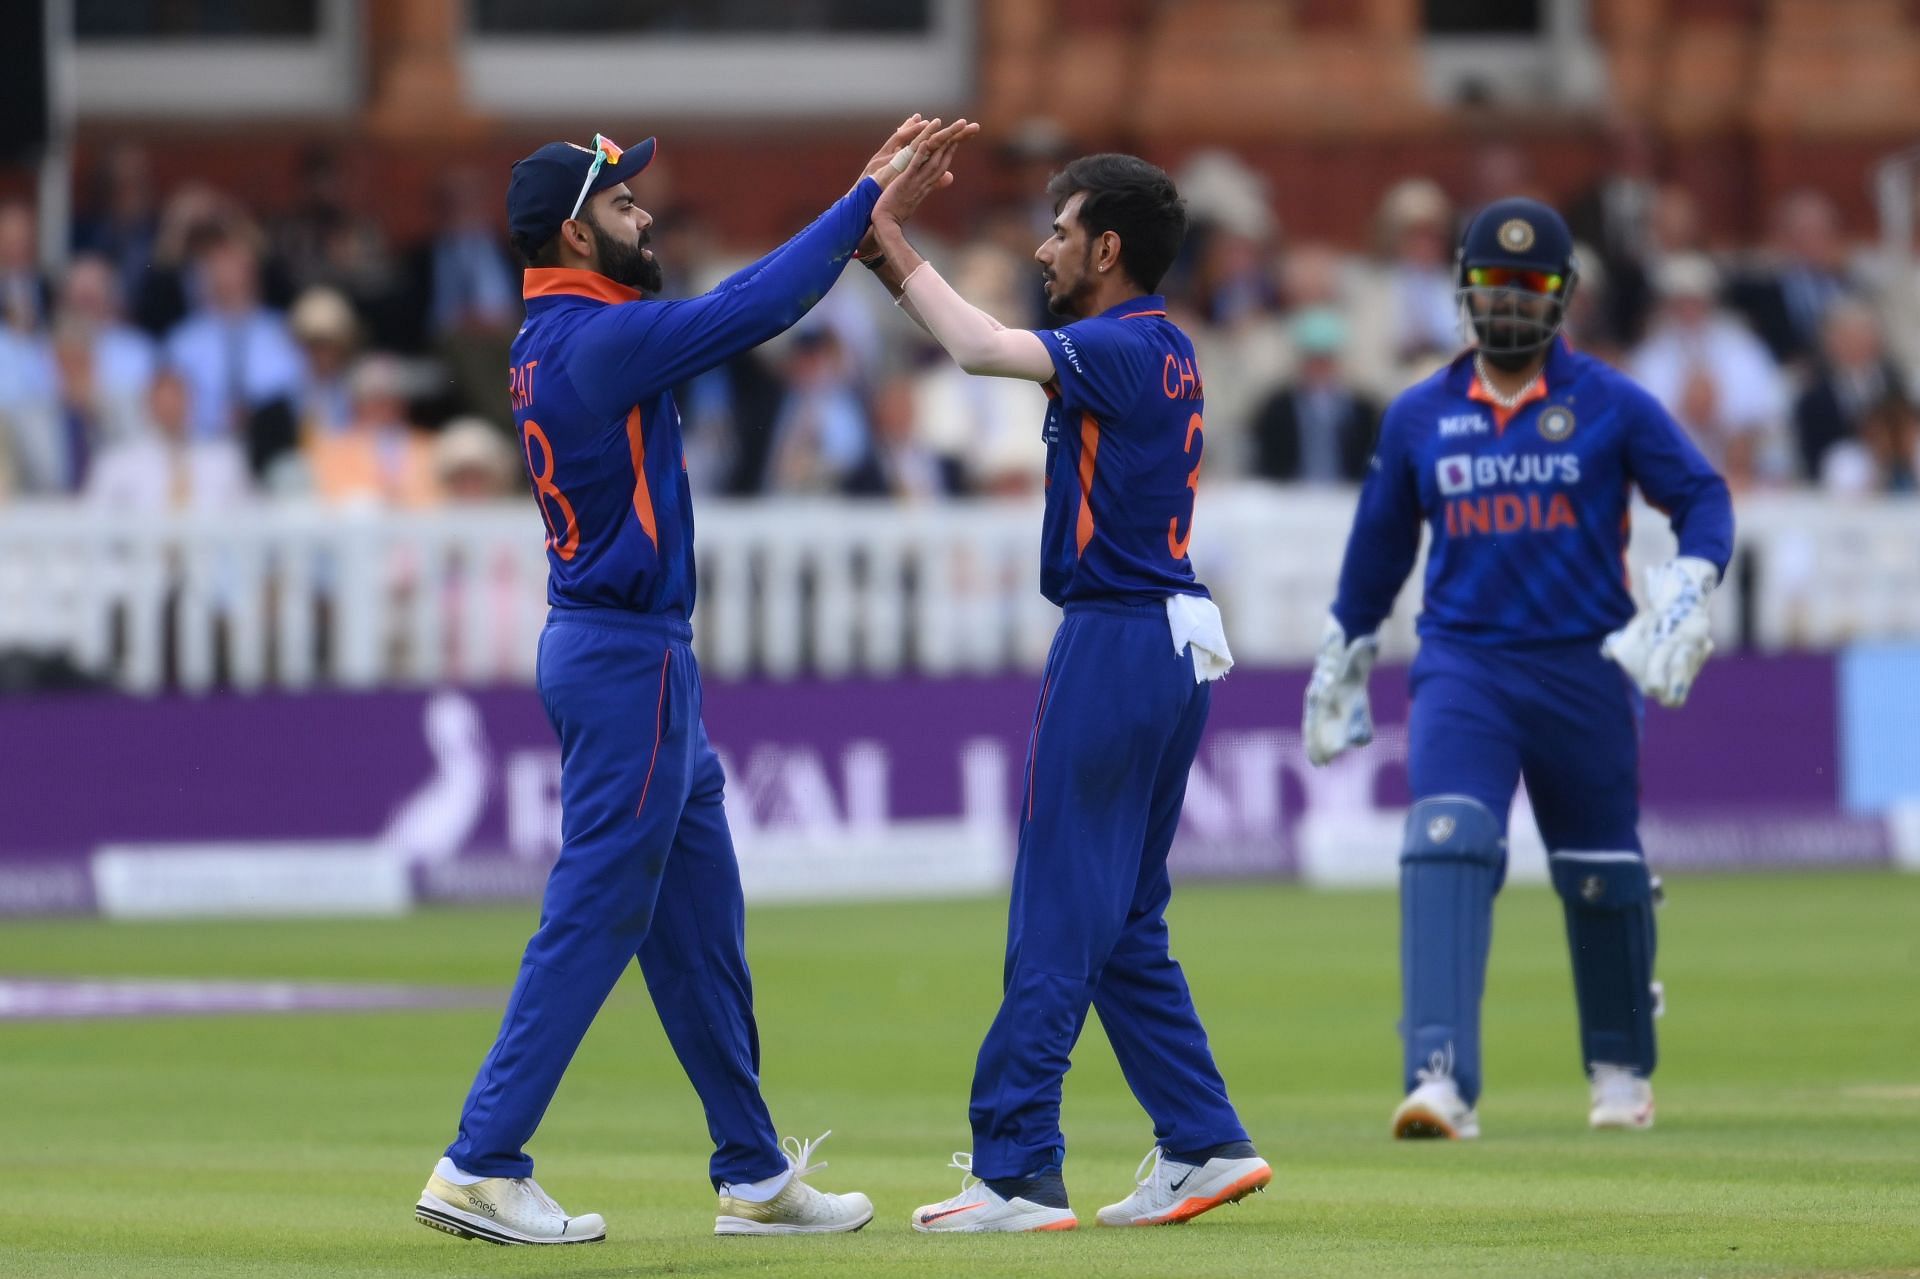 Yuzvendra Chahal bamboozled the England batters with his bag of tricks